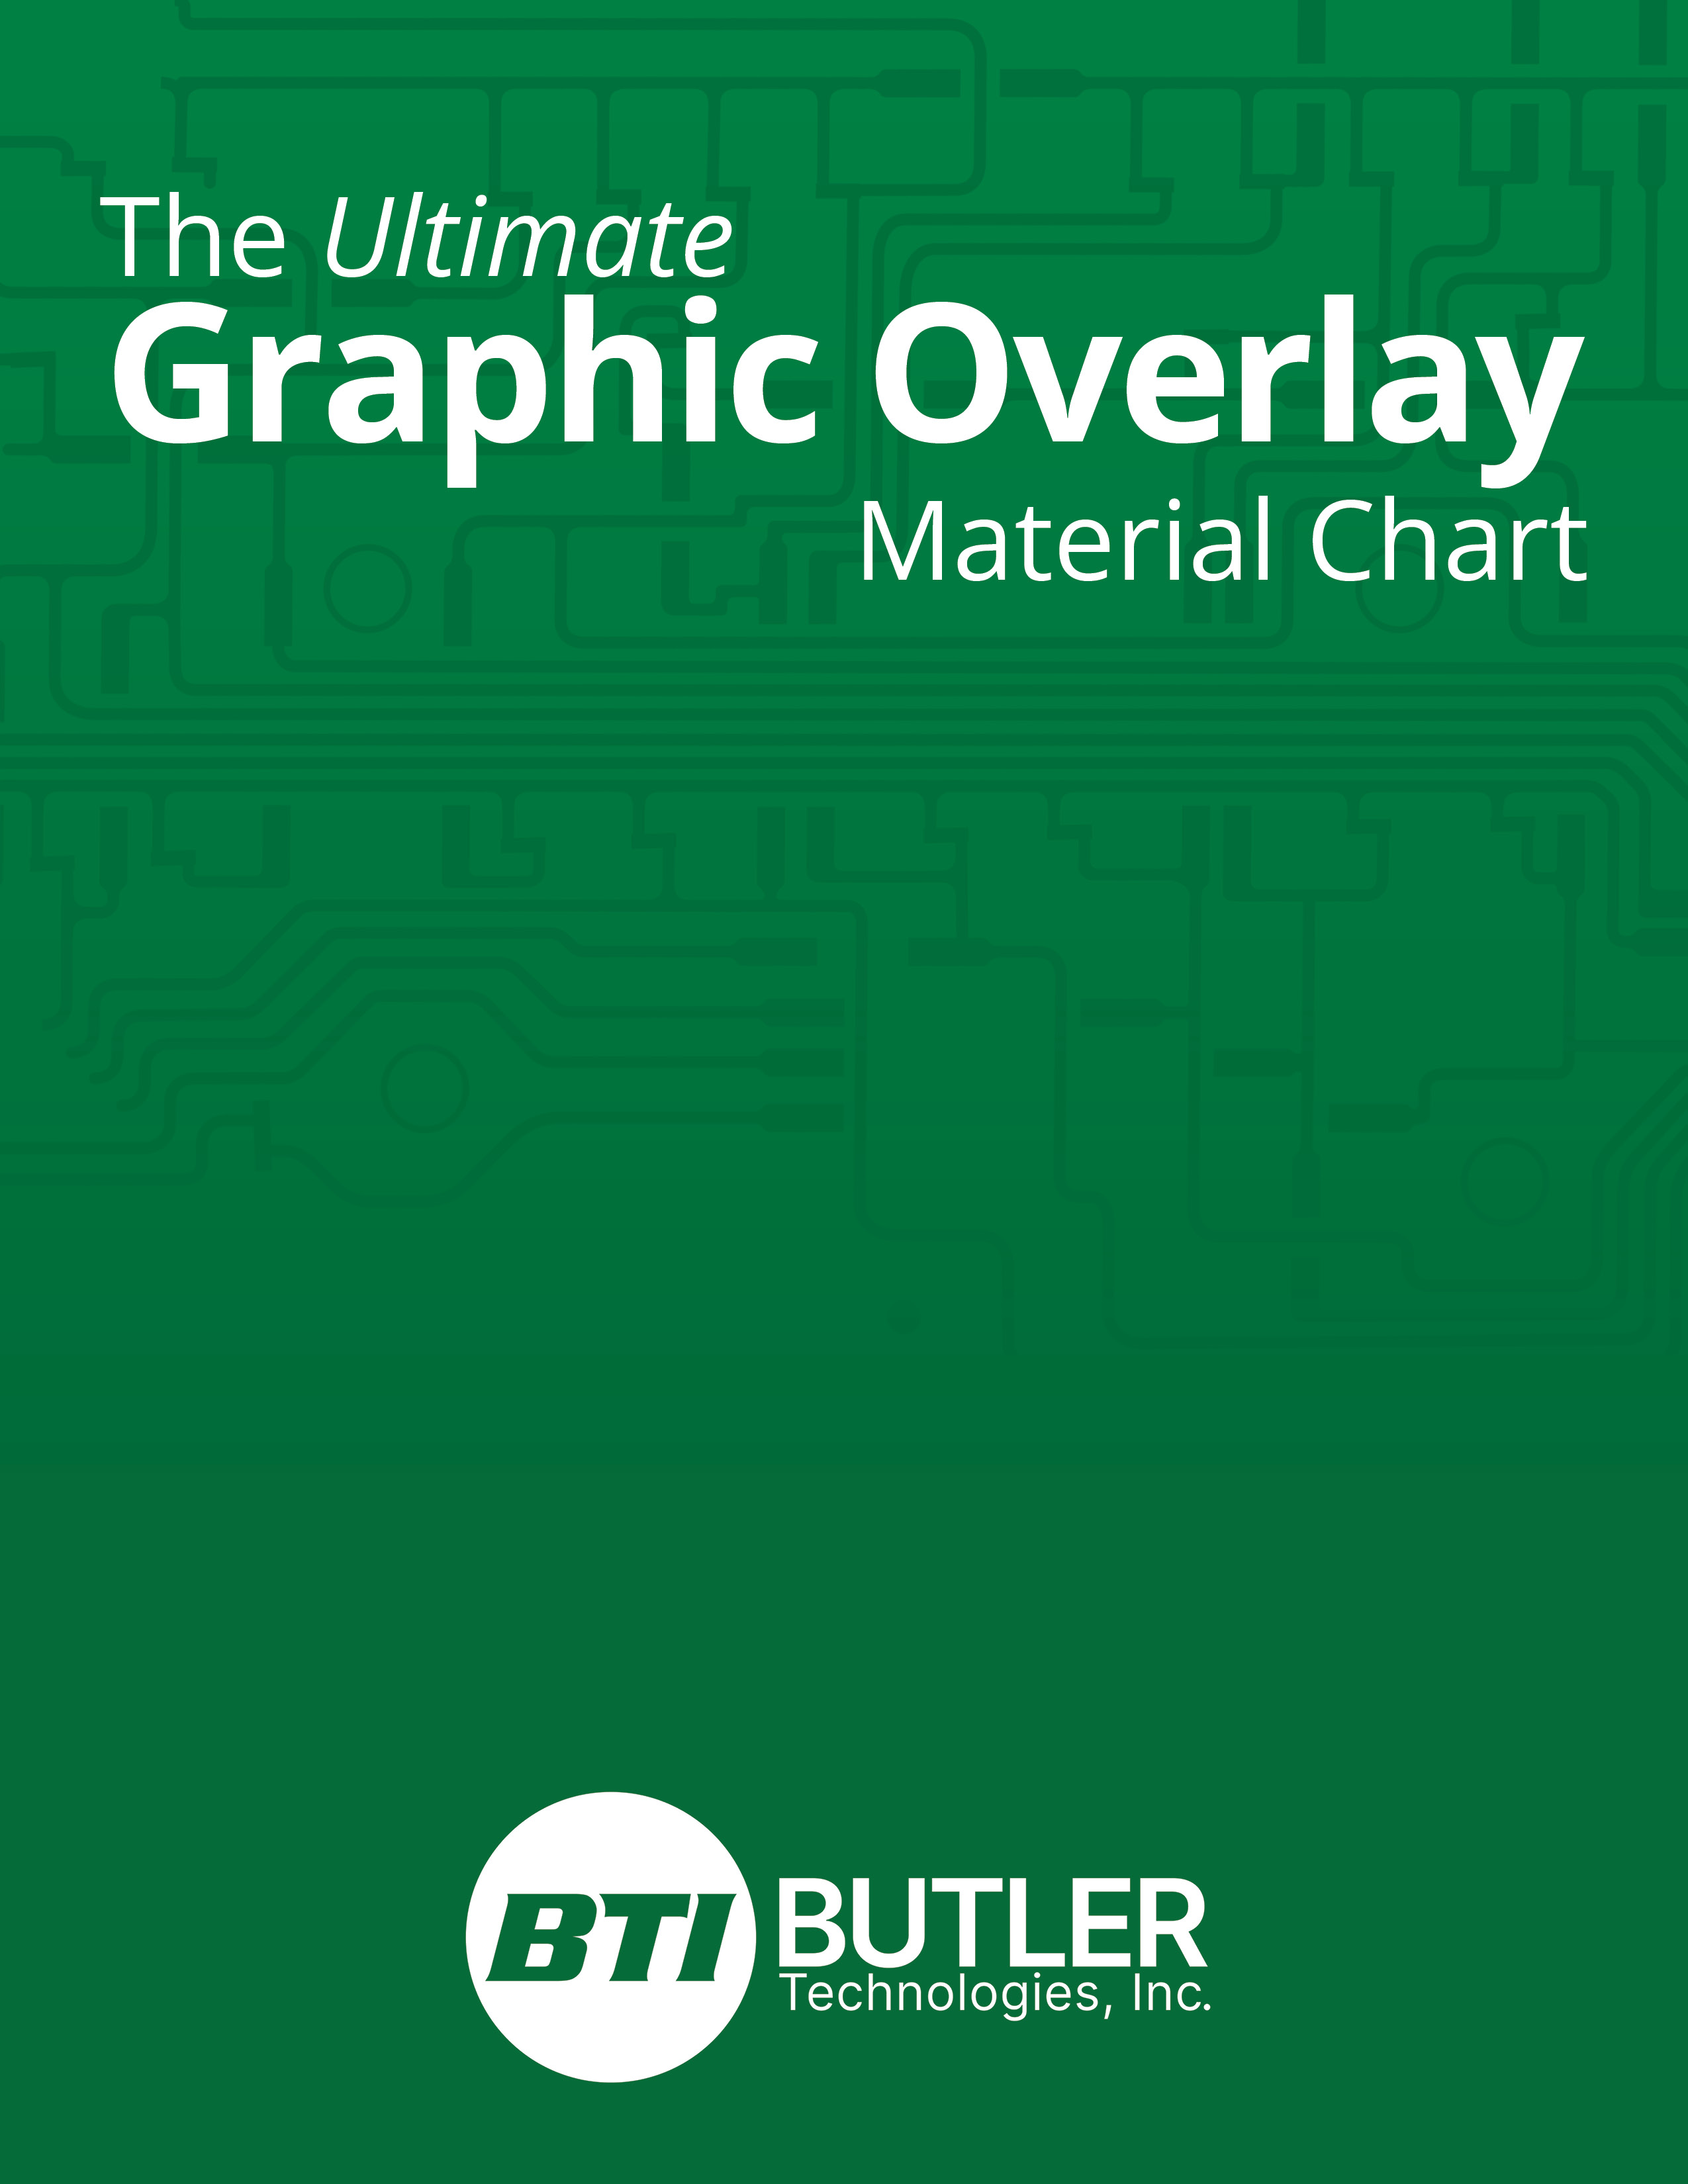 Graphic Overlay Material Selection Chart Image